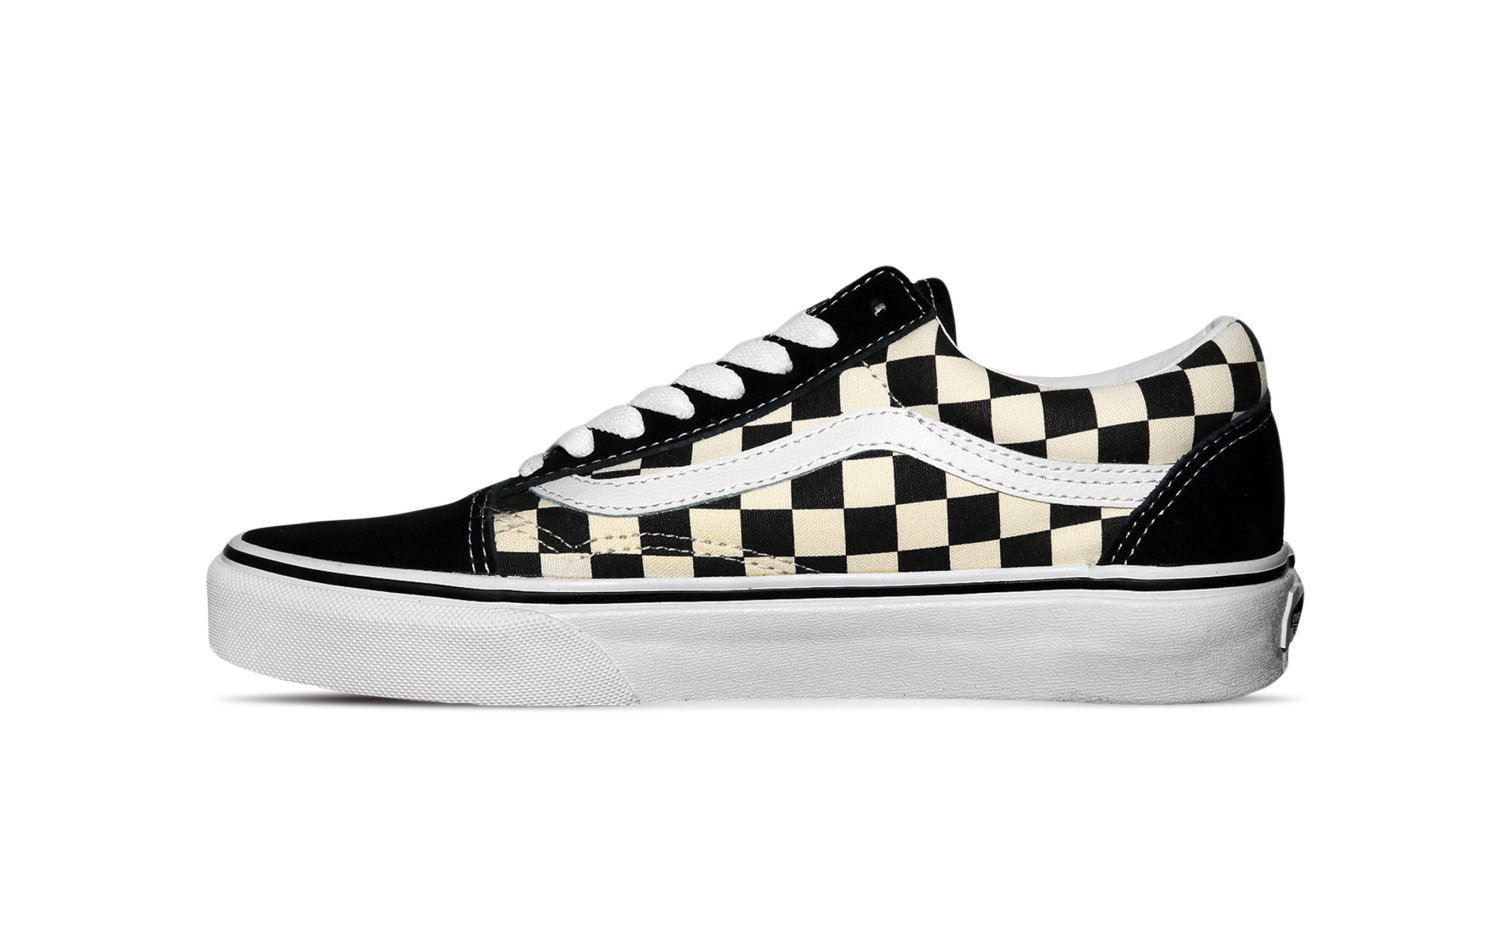 Vans Old Skool Primary Check (VN0A38G1P0S)